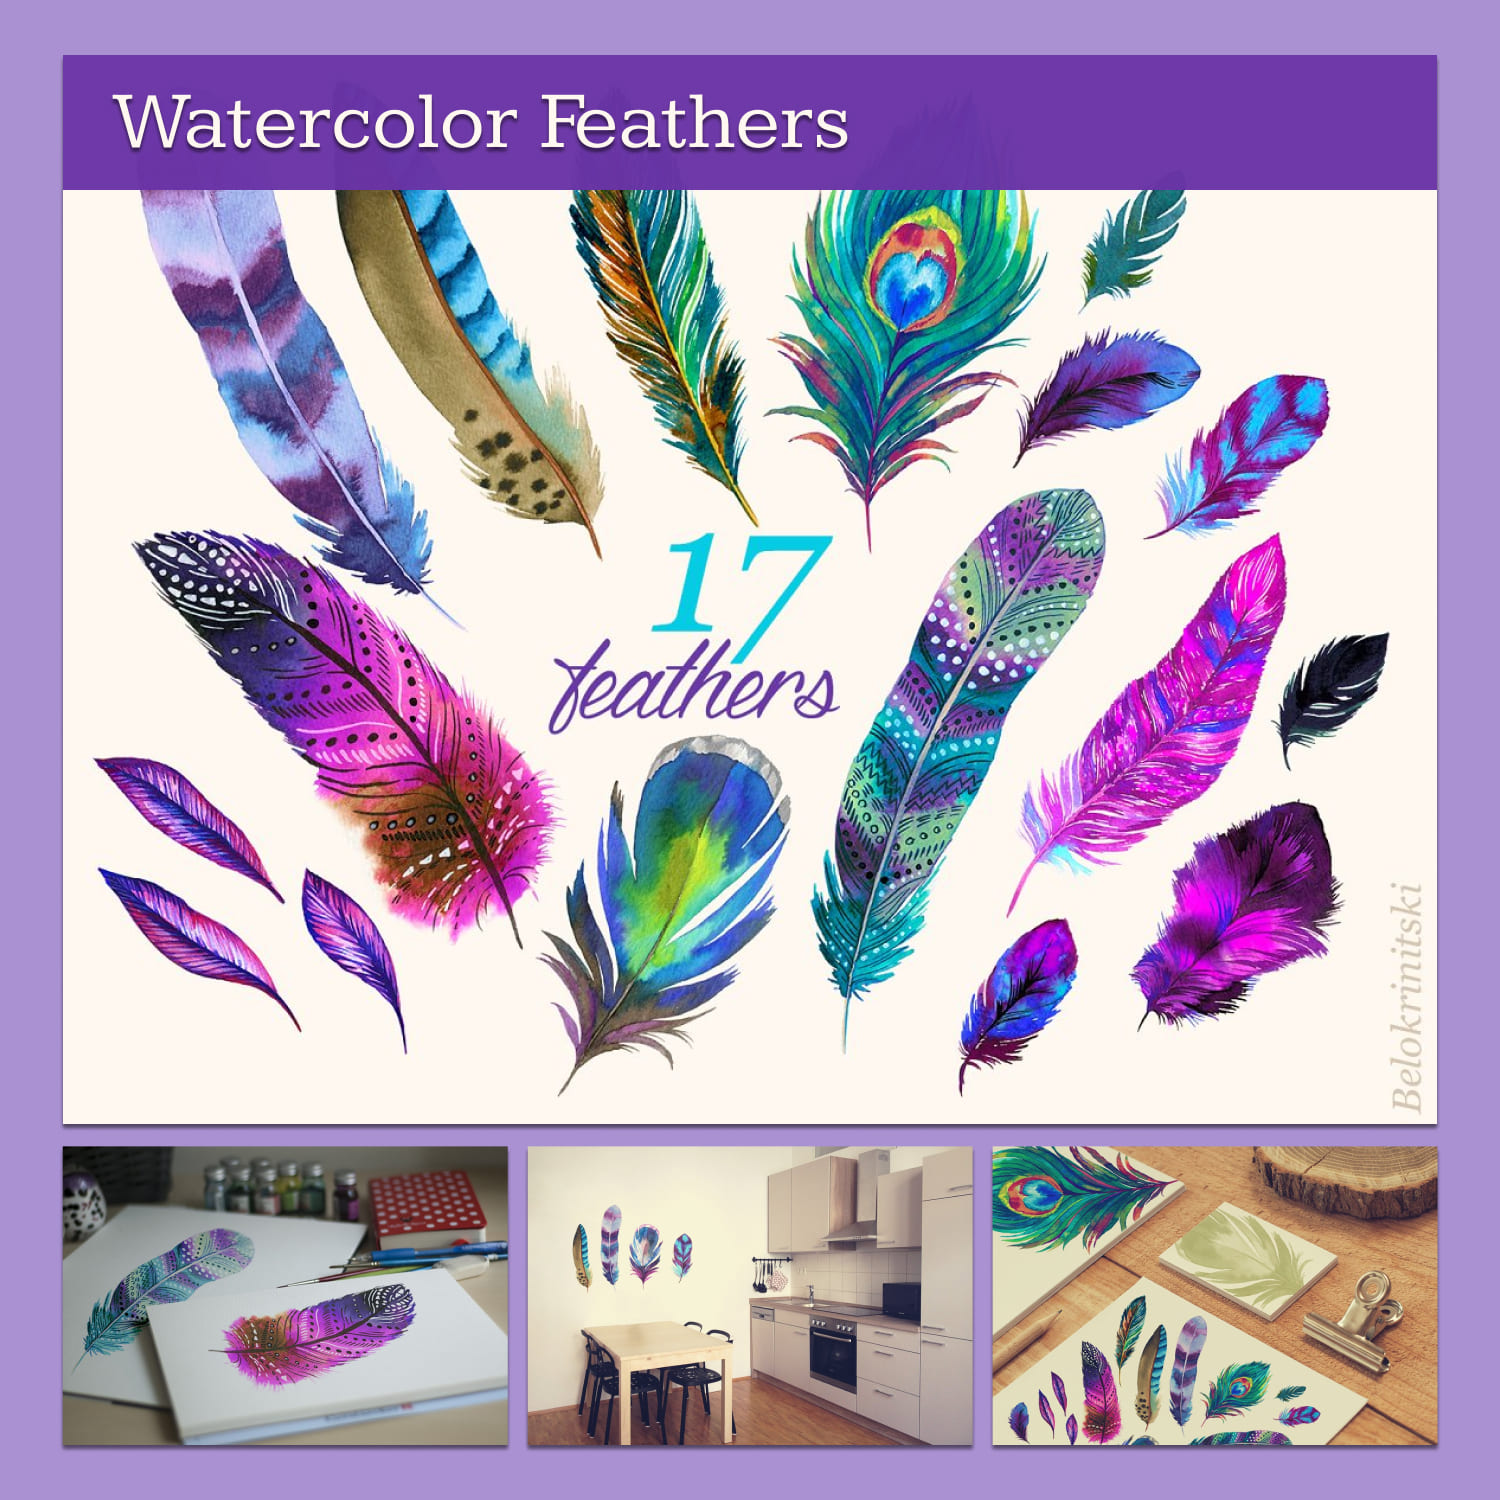 Set of Watercolor Feathers Illustrations cover image.